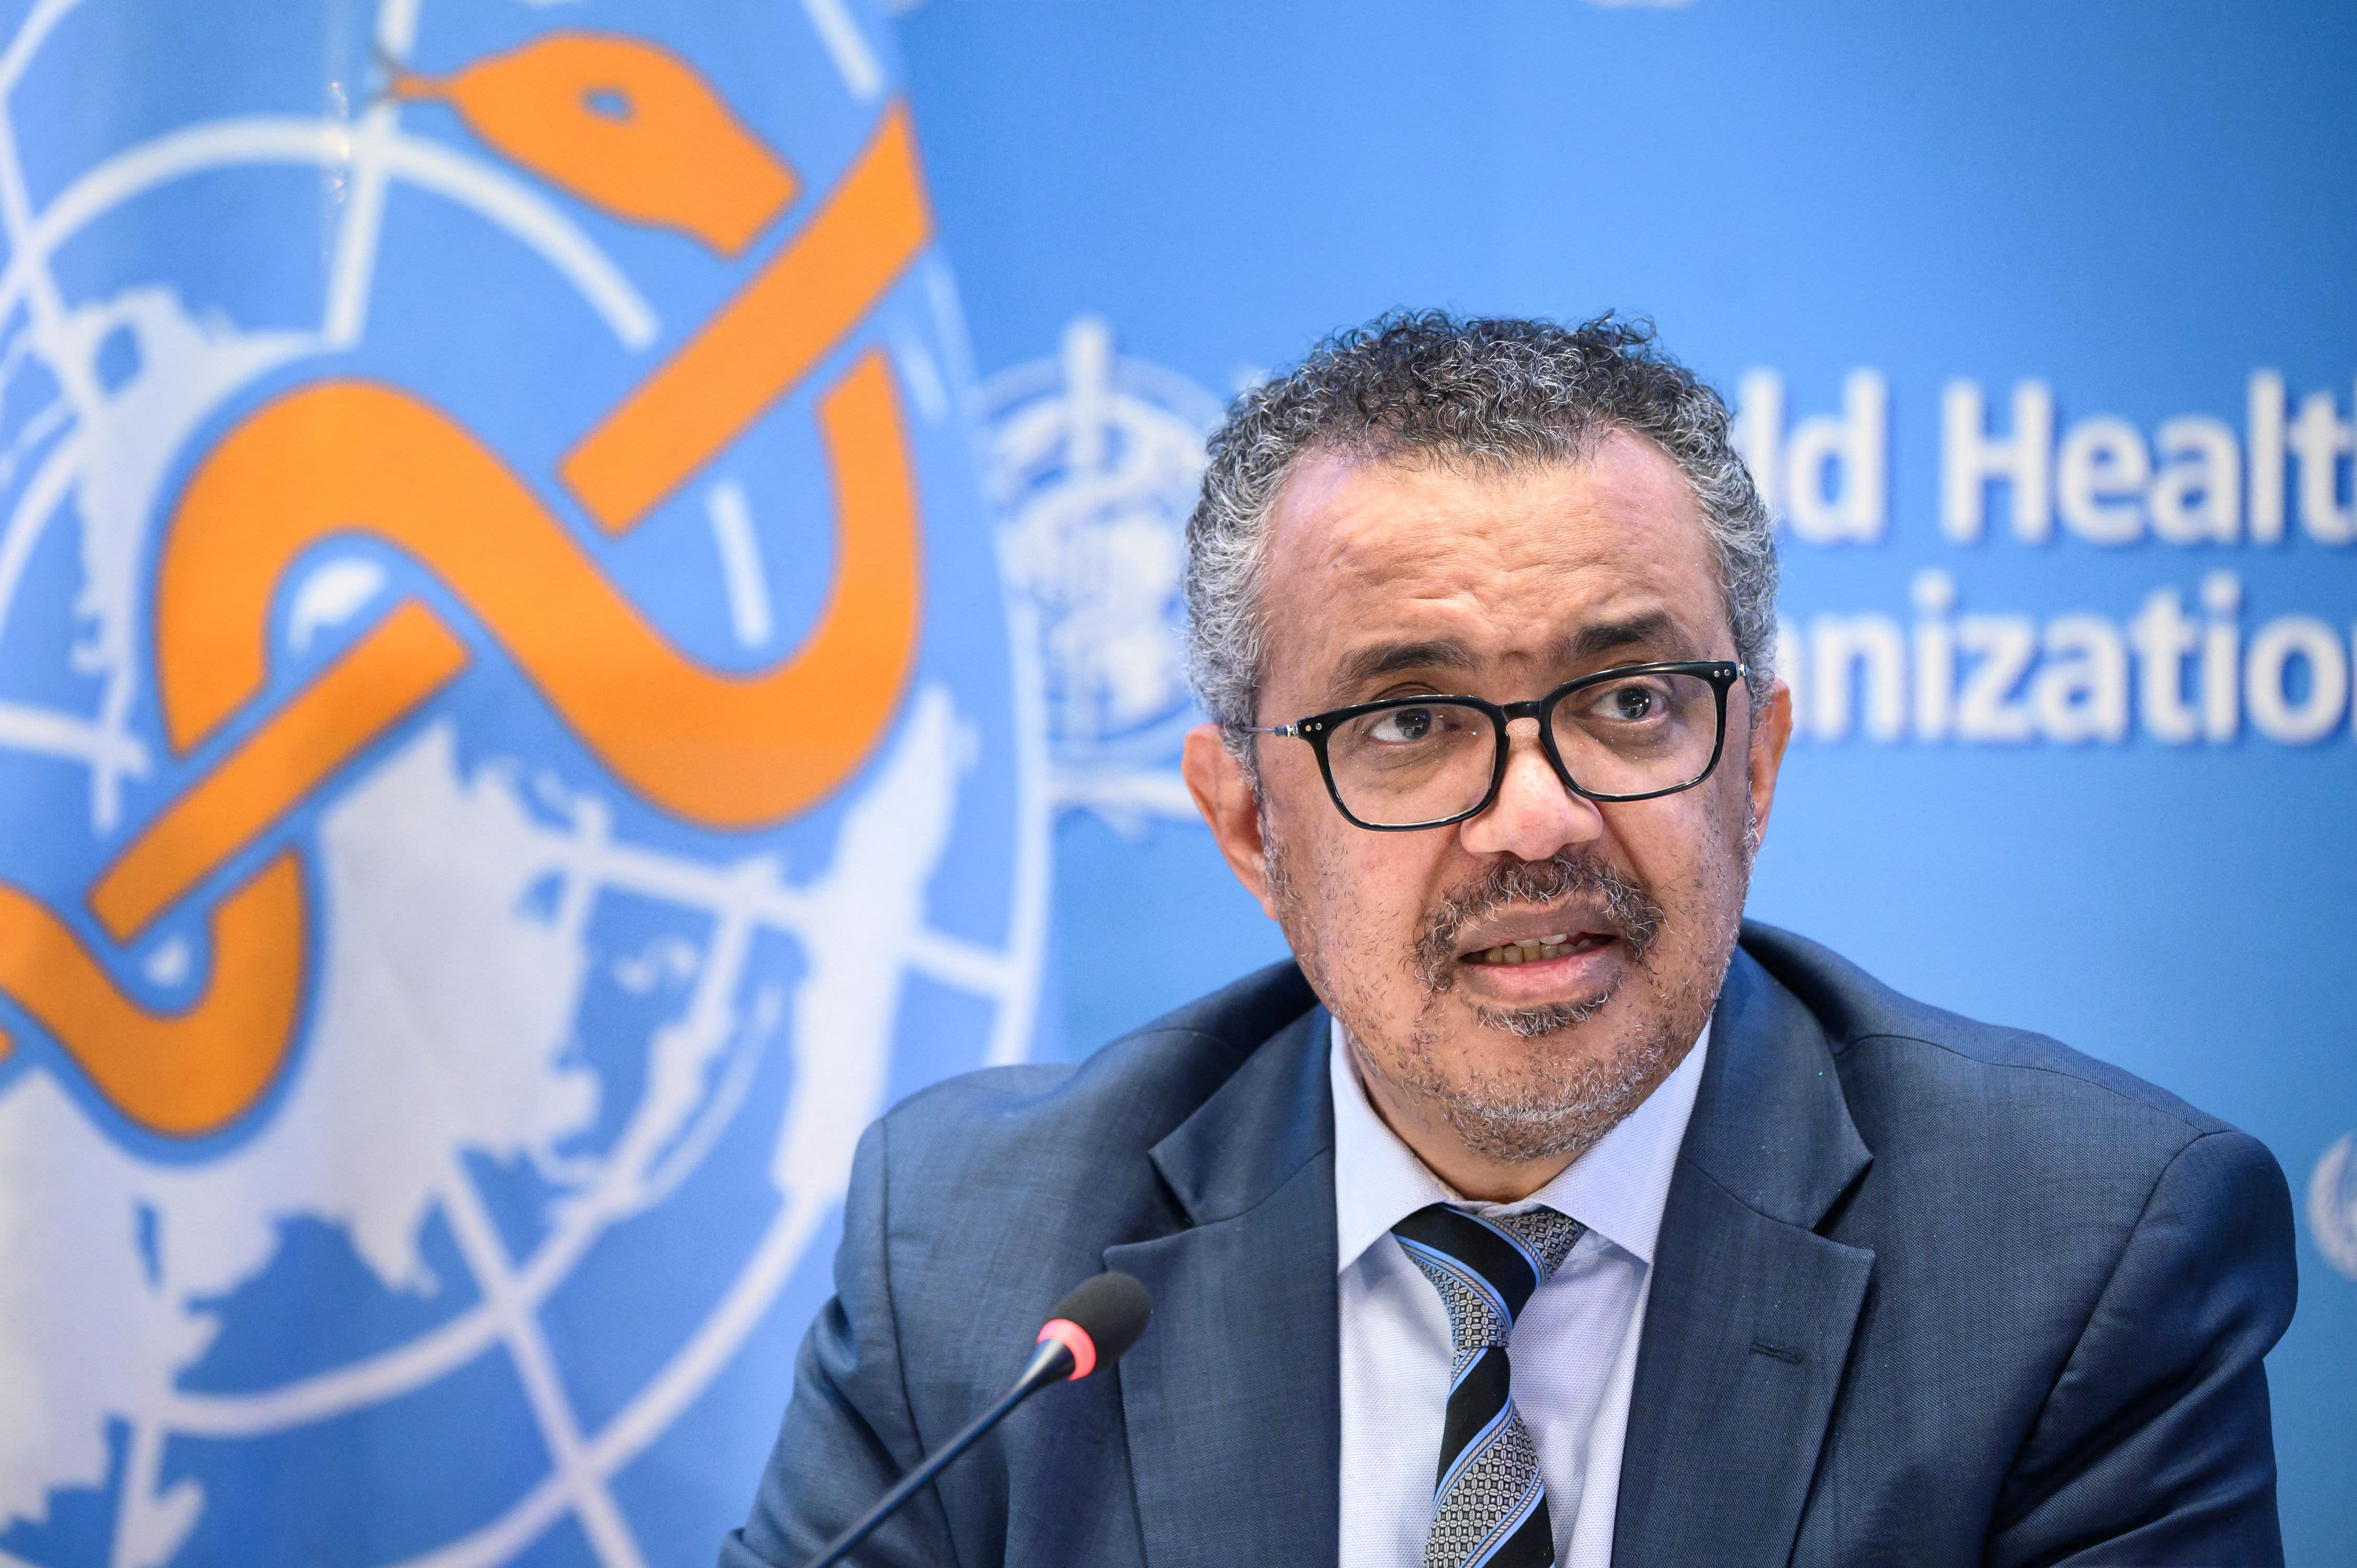 Covid pandemic at a ‘critical juncture’ and we still have a long road ahead, WHO’s Tedros says